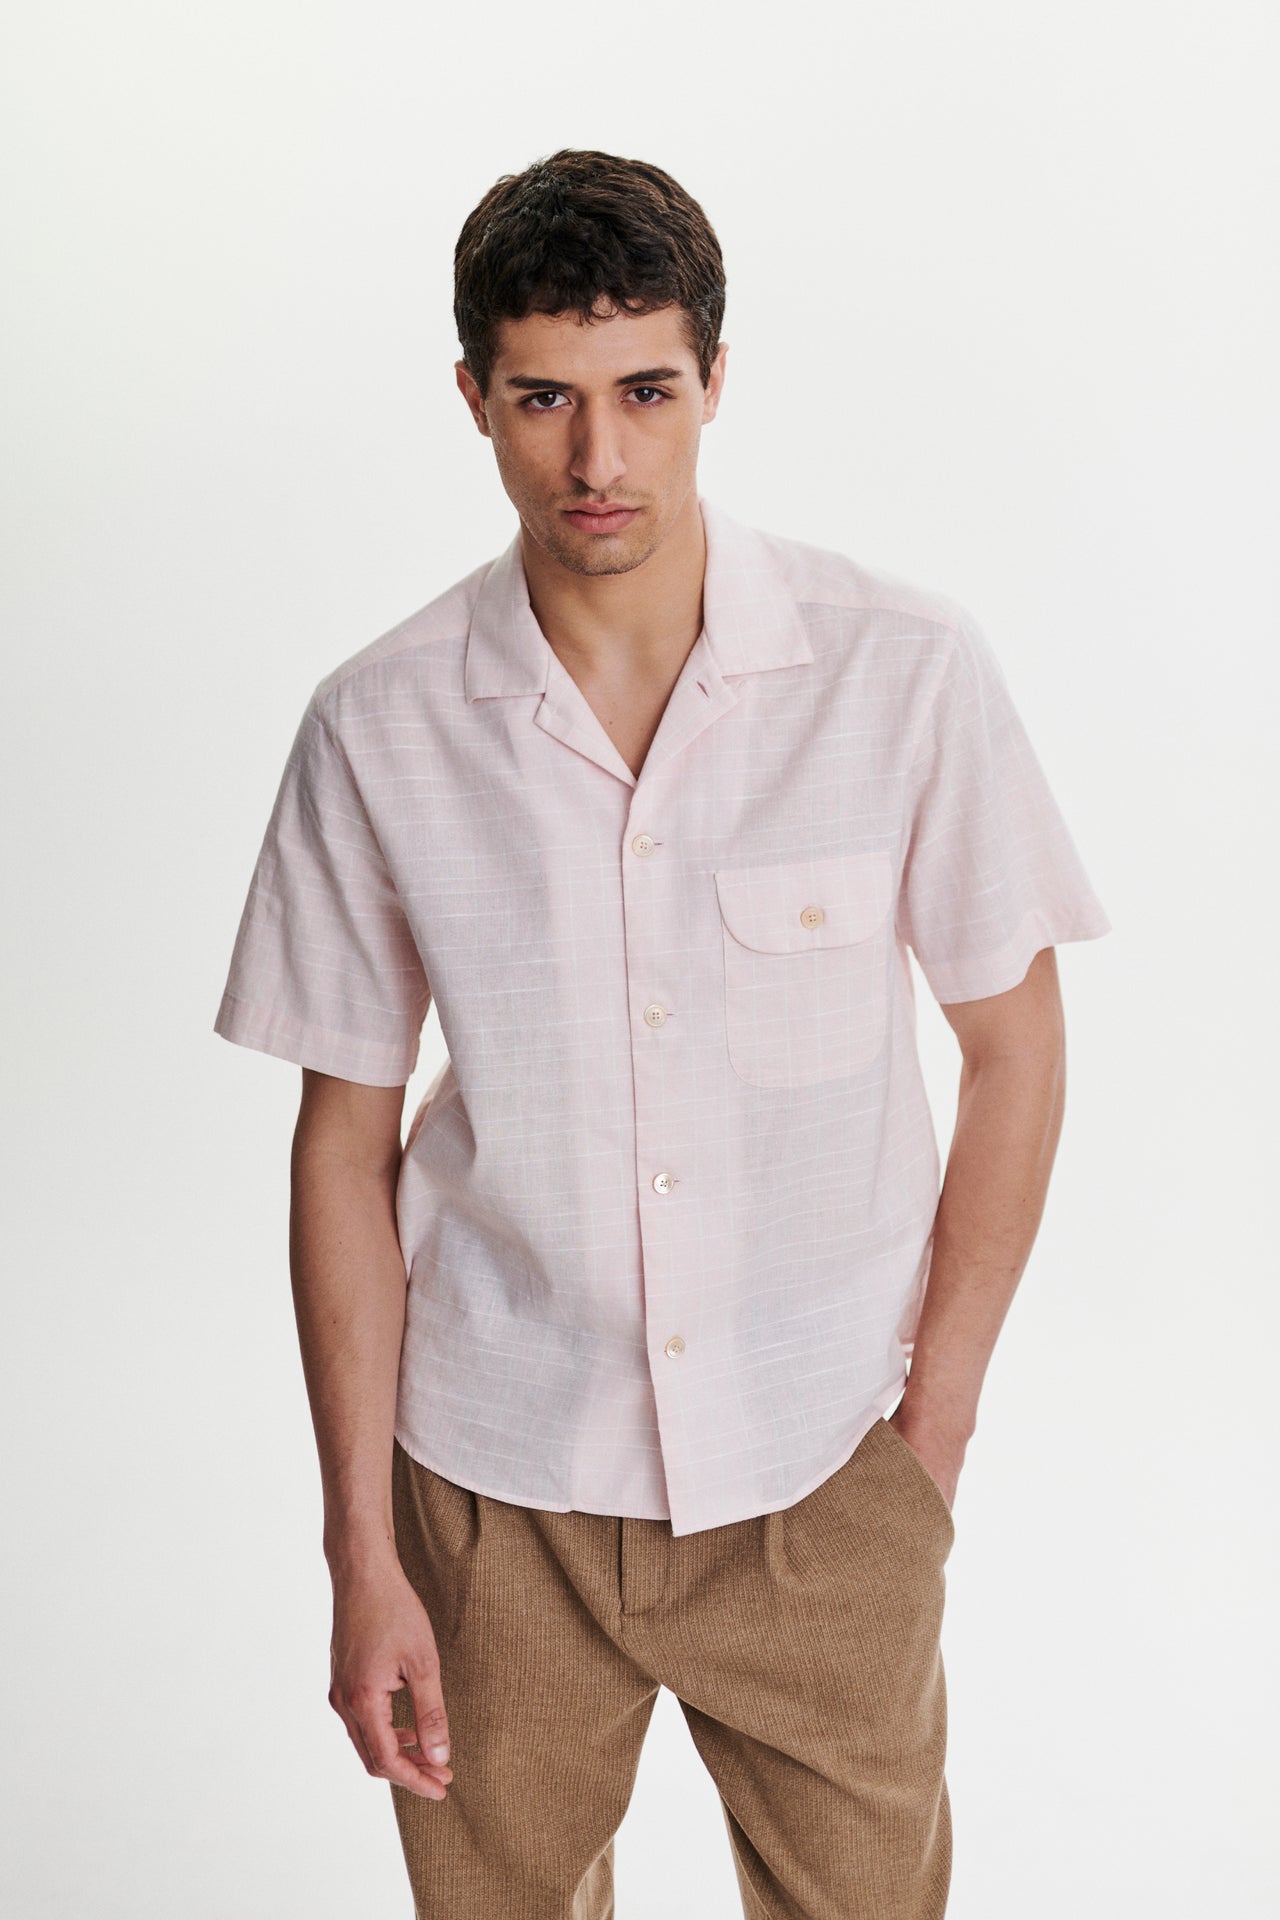 Short Sleeve Camp Collar Shirt in a Subtle Pink Mix of Portuguese Cotton, Linen and Pineapple